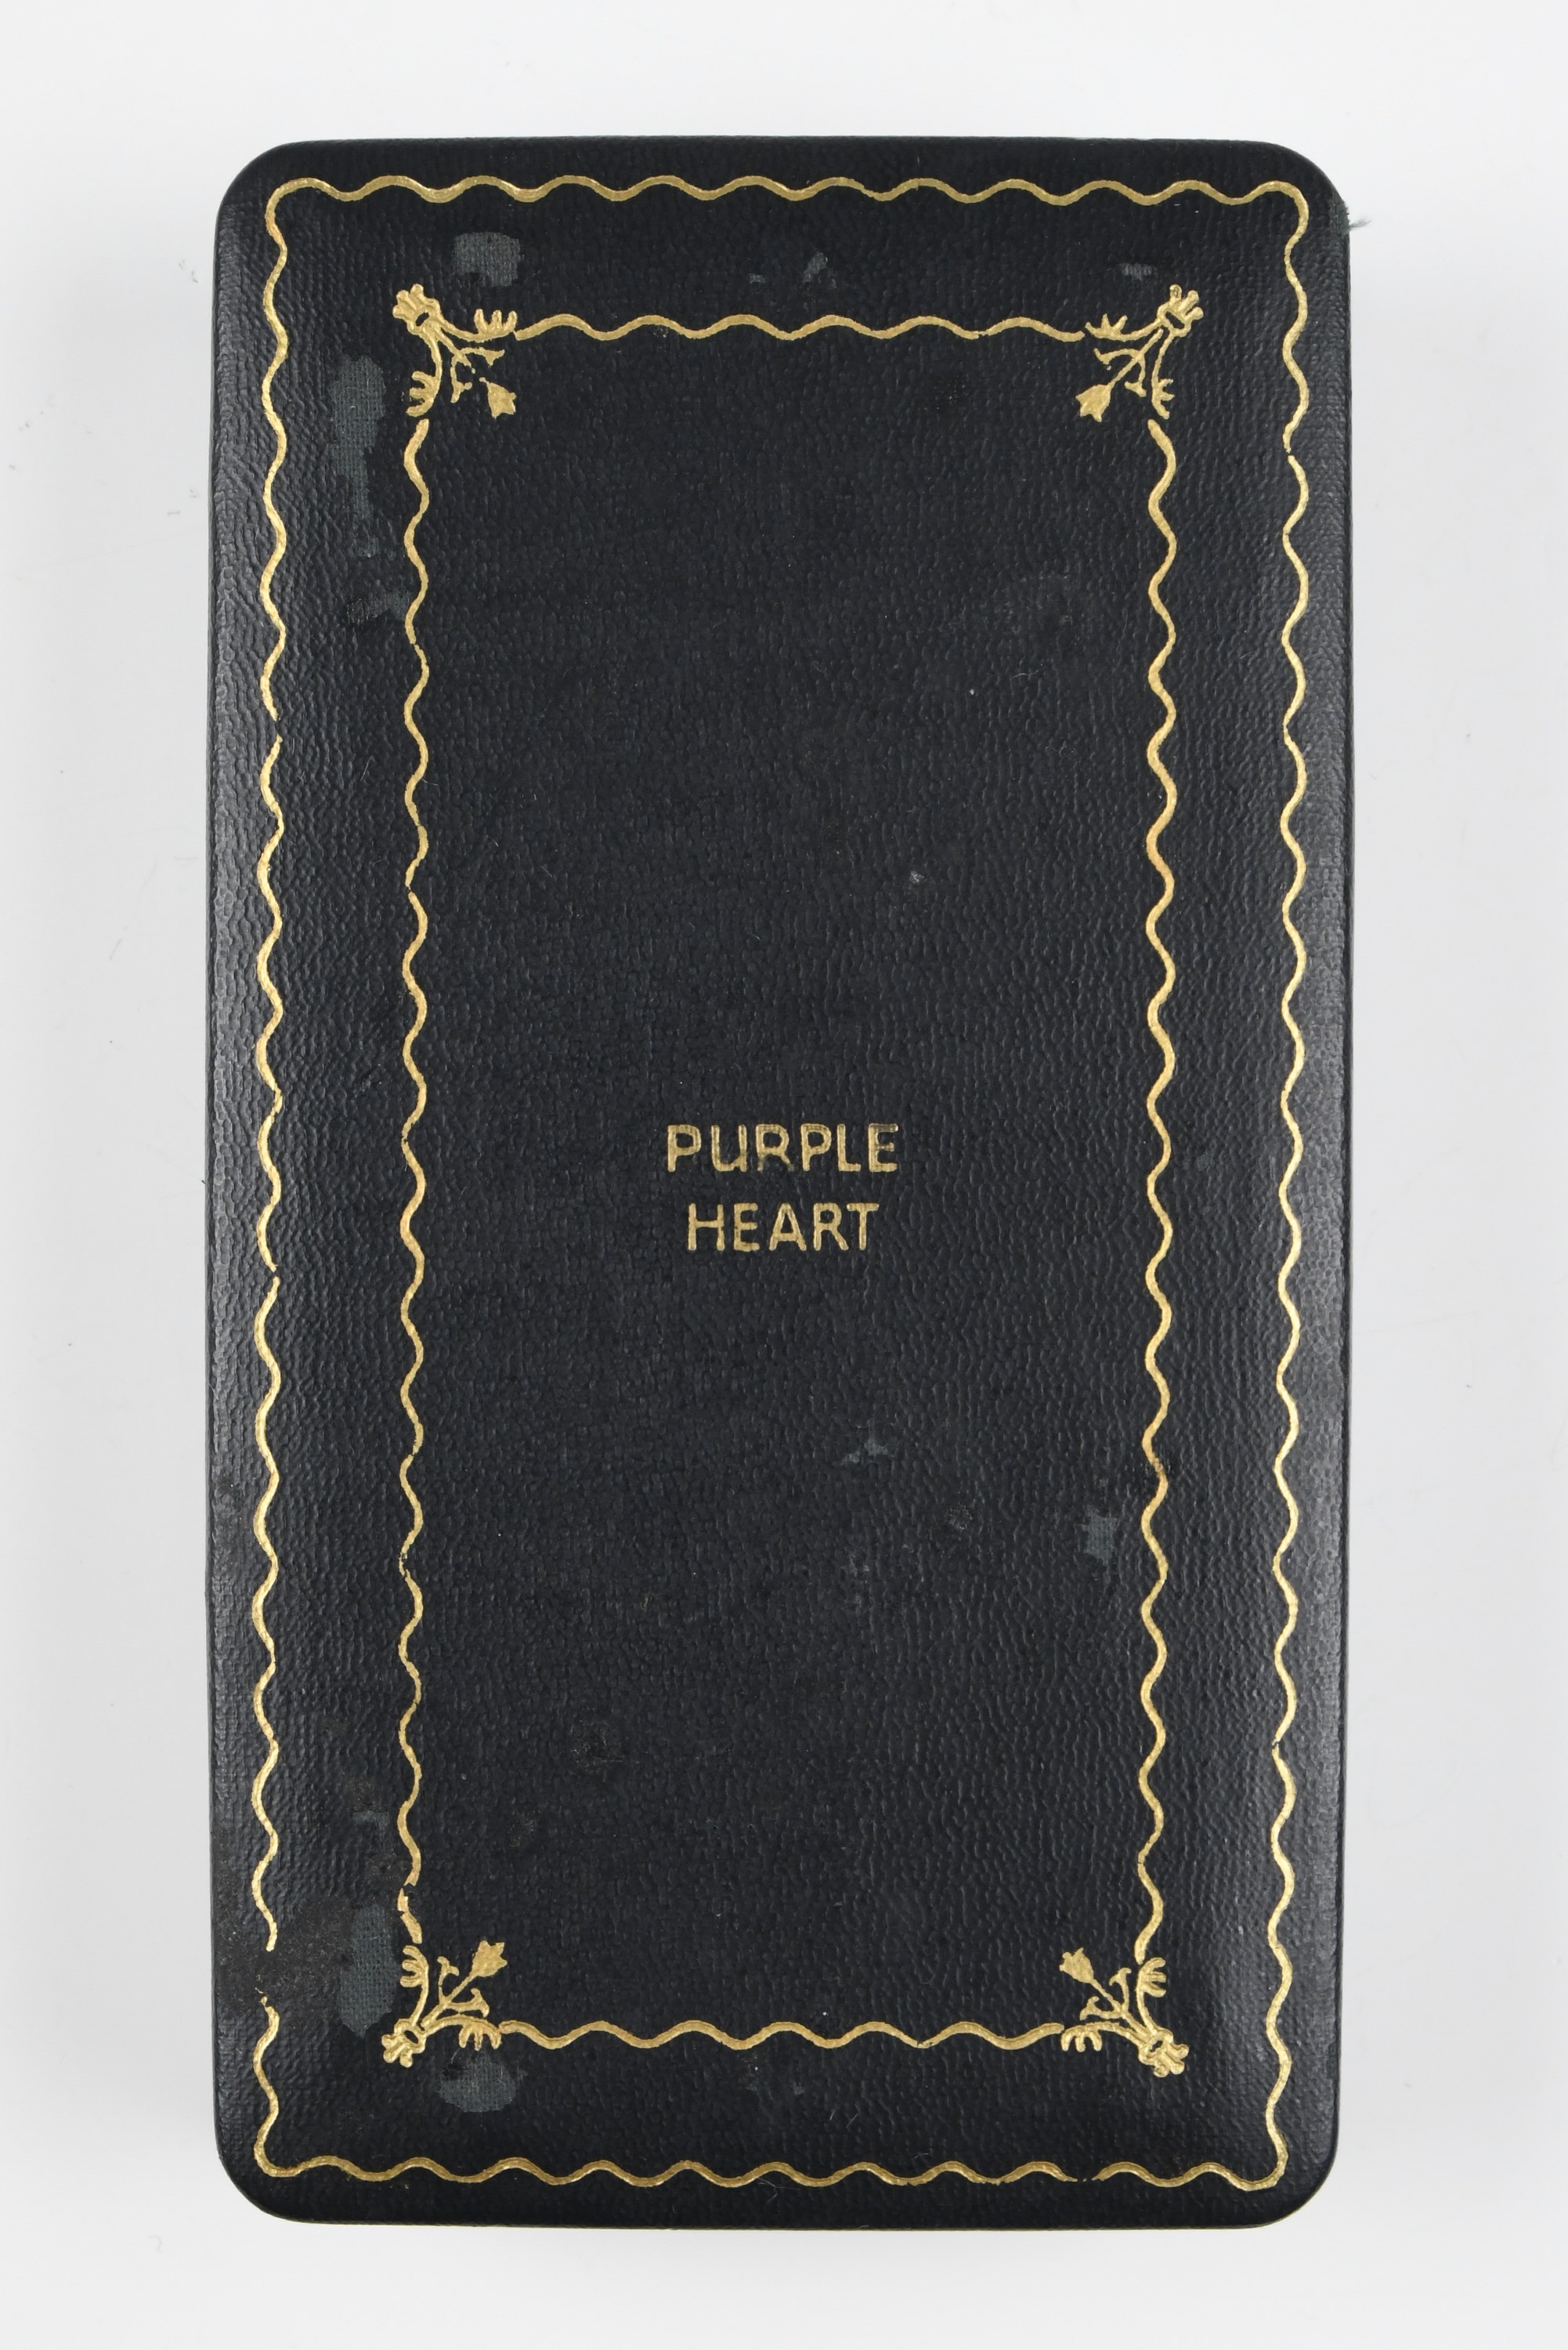 A cased US military Purple Heart medal - Image 2 of 2